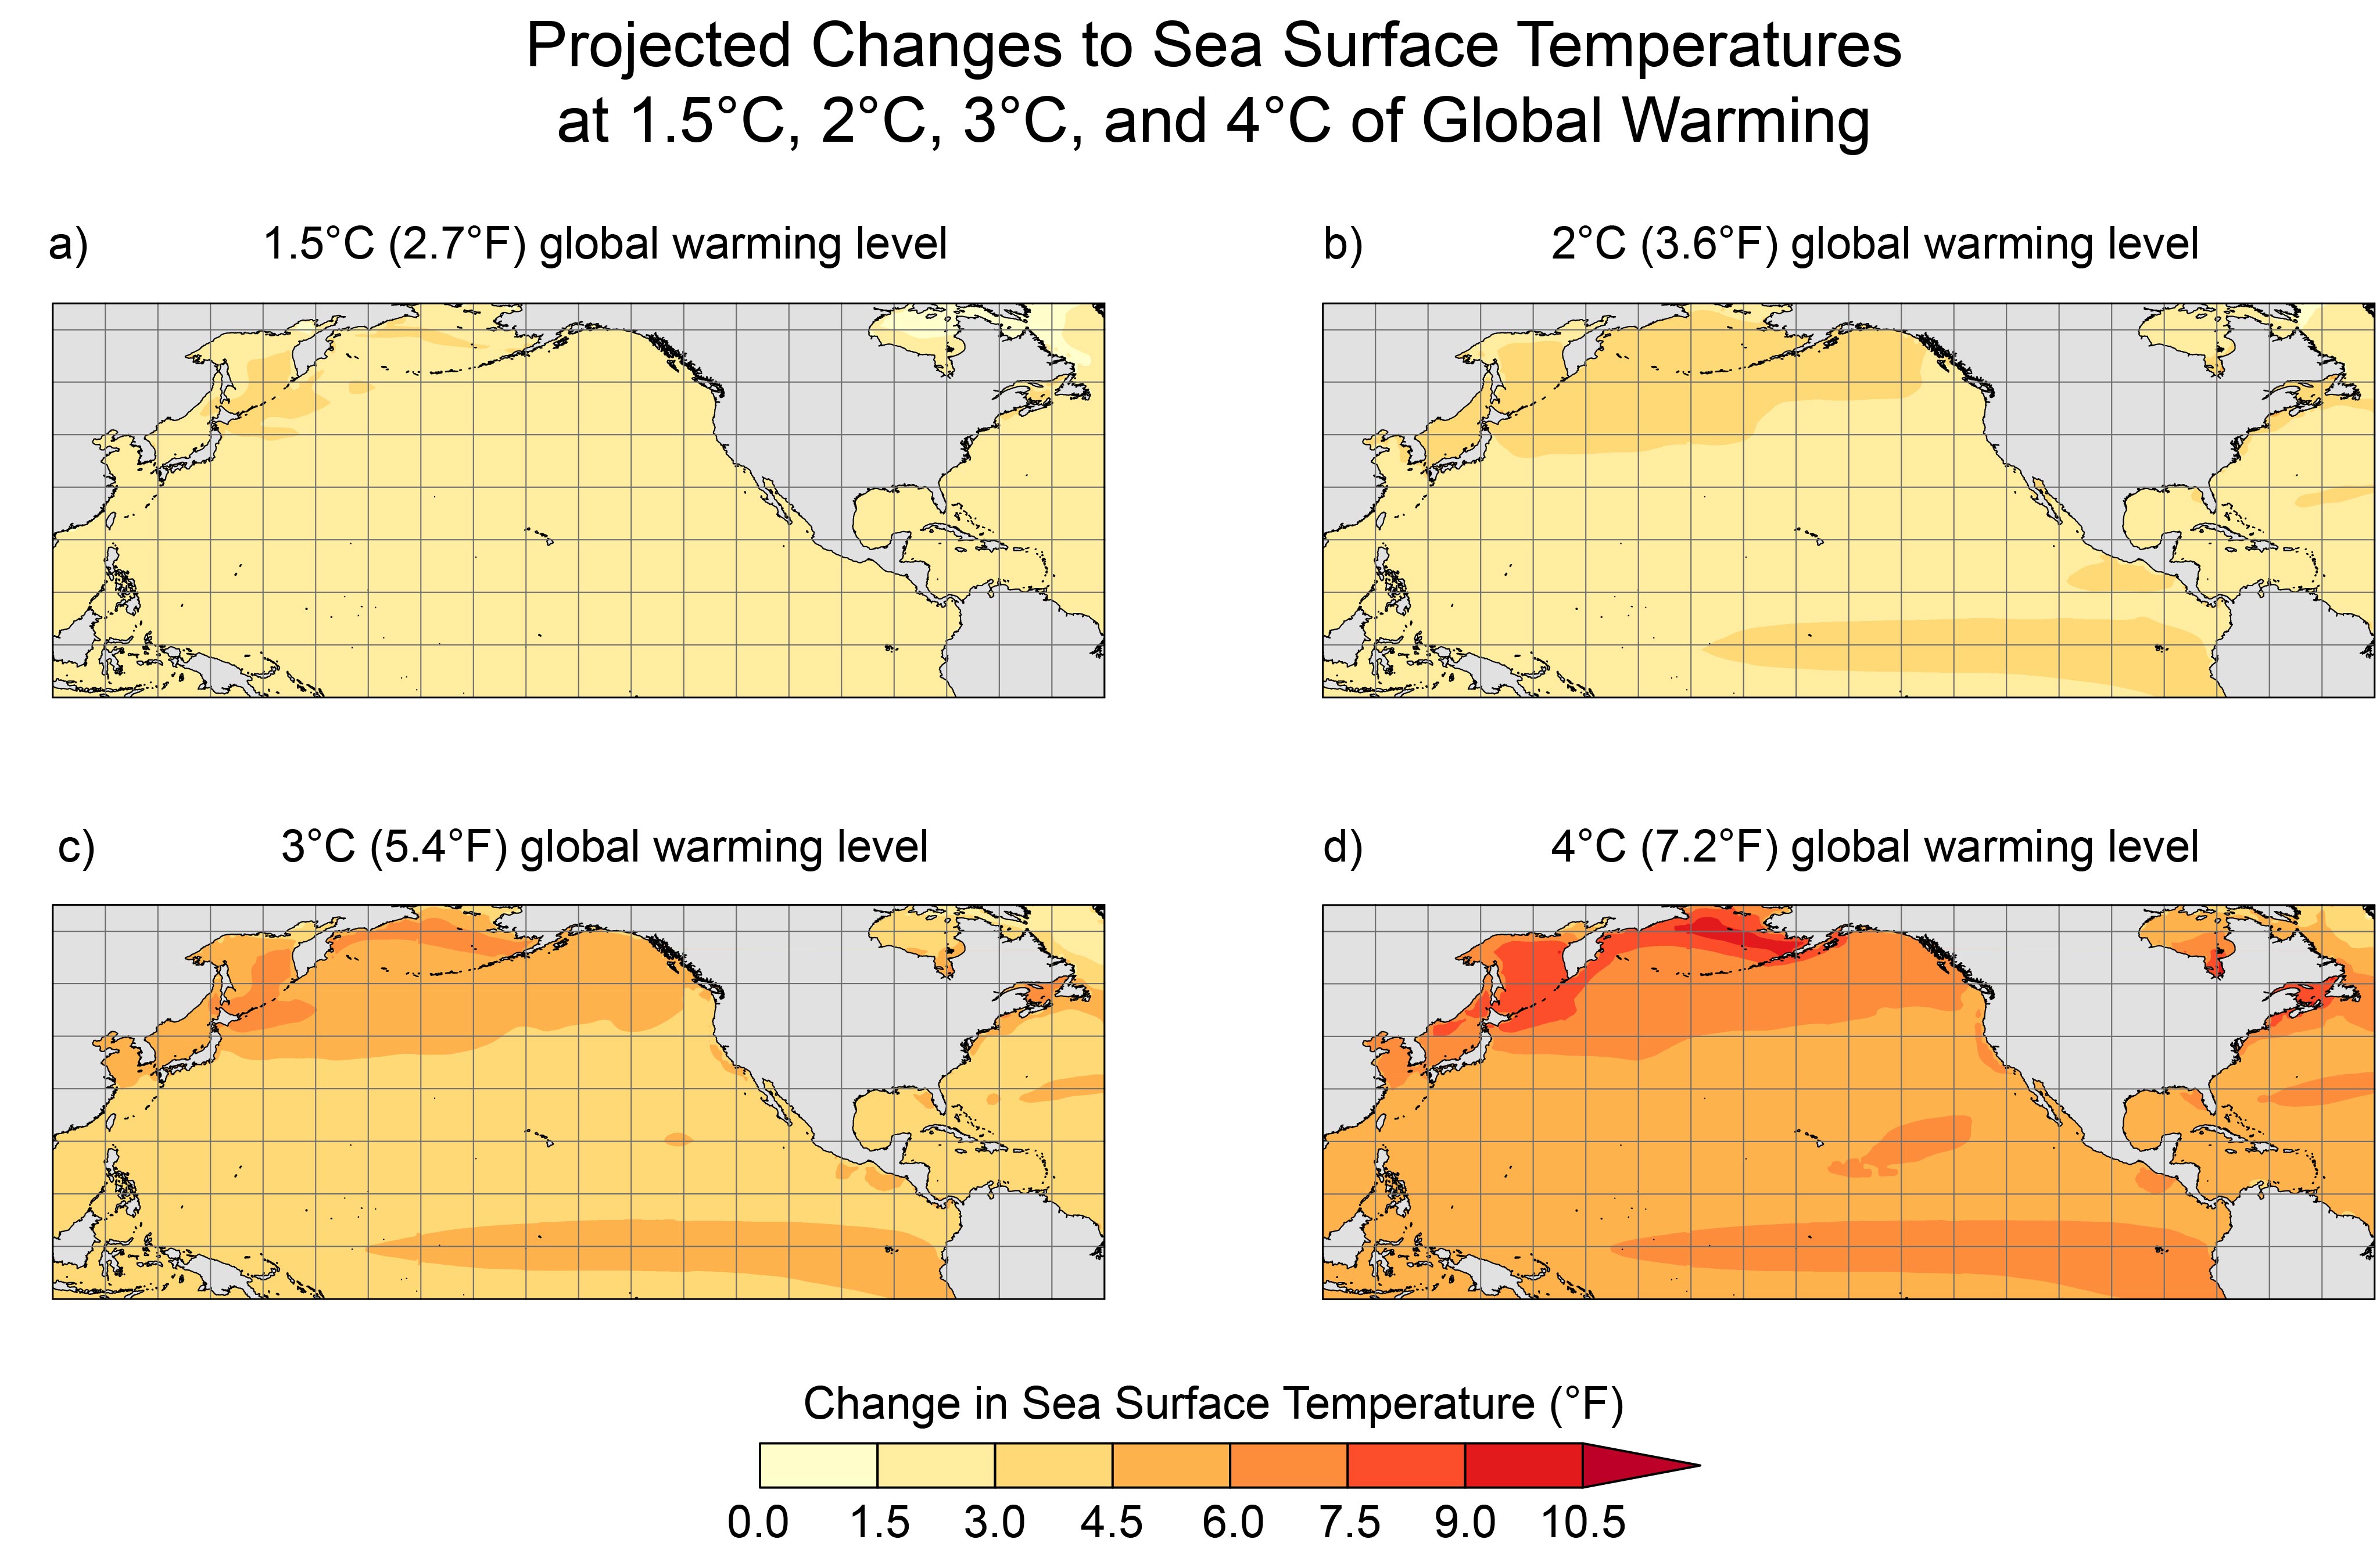 Projected Changes to Sea Surface Temperatures at 1.5°C, 2°C, 3°C, and 4°C of Global Warming